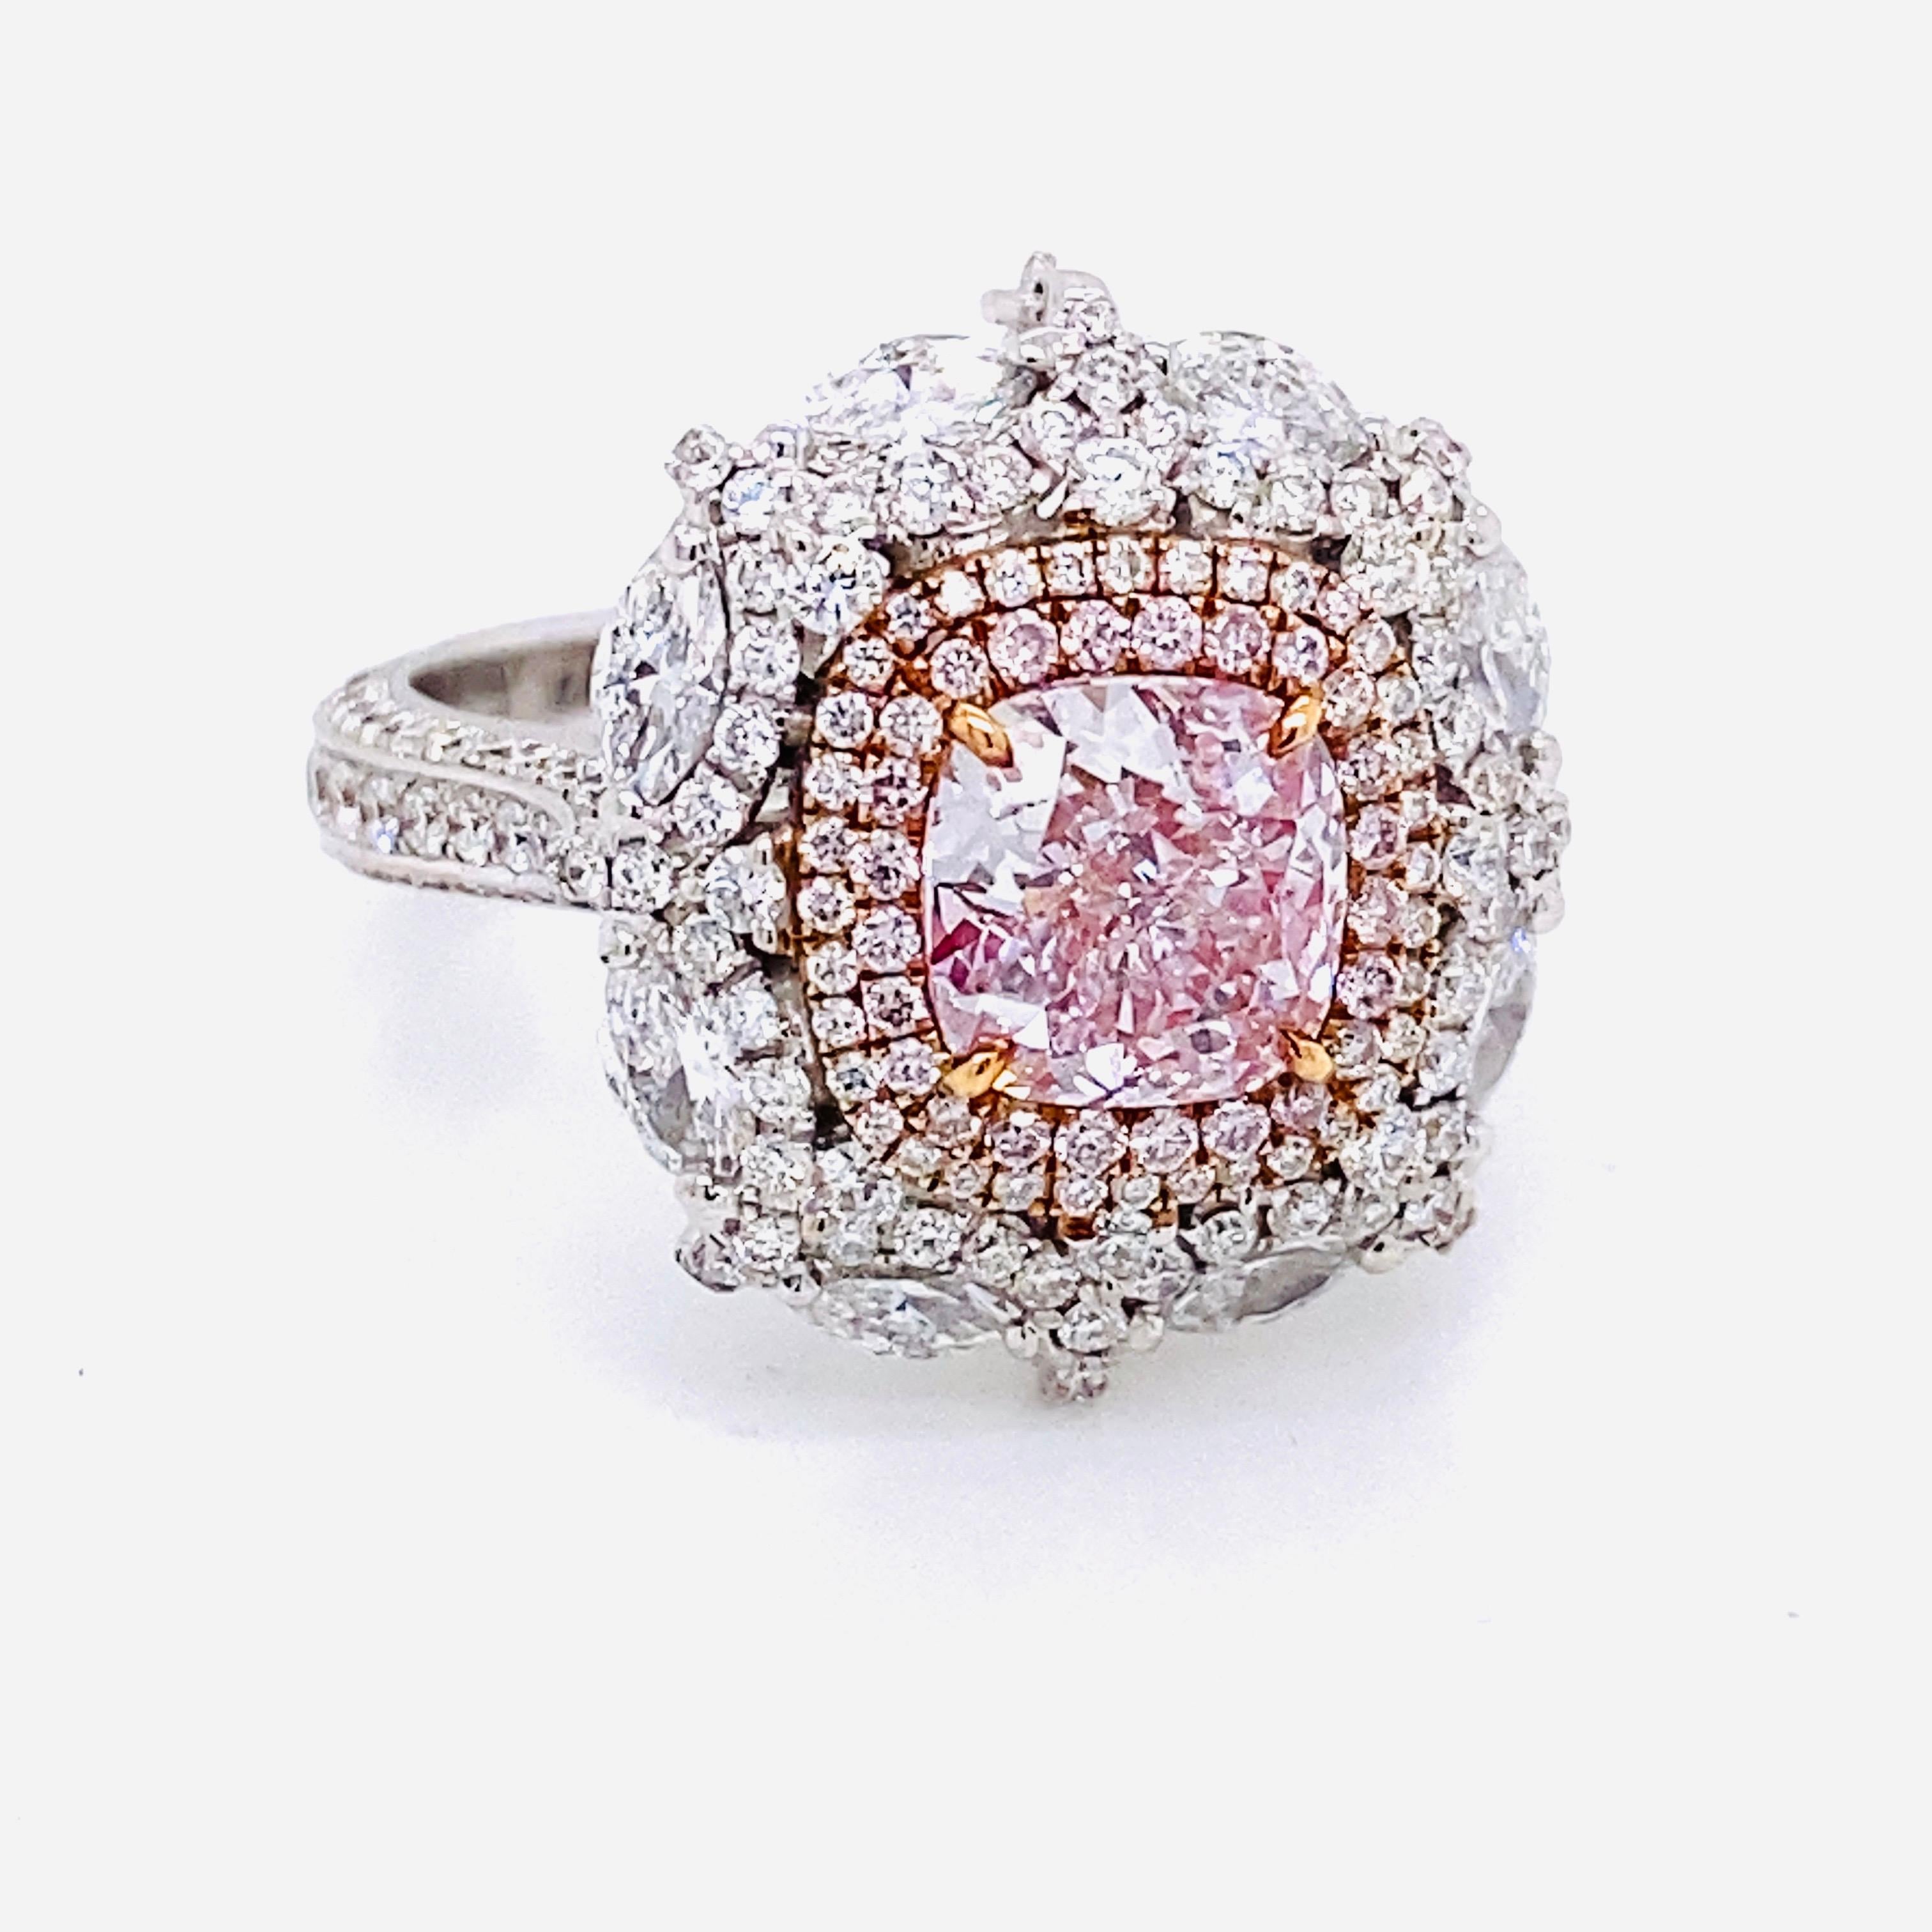 From the vault at Emilio Jewelry New York,
a gorgeous fiery Gia certified natural pure pink diamond over 1.60 carats sits in the center of this masterpiece. Thanks to our expertise in the Emilio Jewelry Atelier, after setting this pink diamond faces